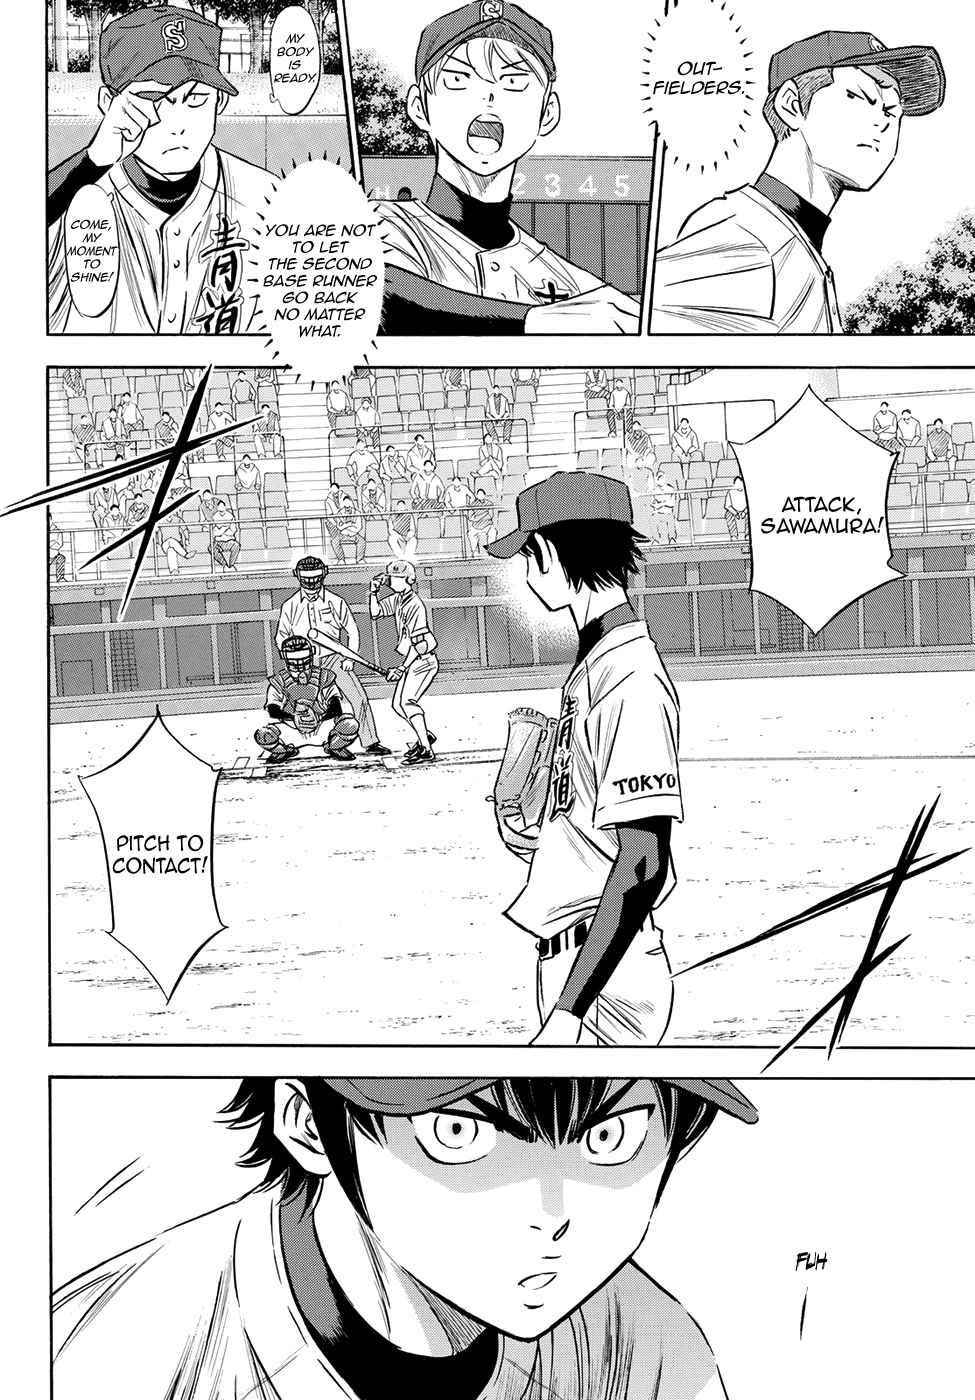 Diamond no Ace Act II Vol. 8 Ch. 73 Individual Strength and Shape of the Team